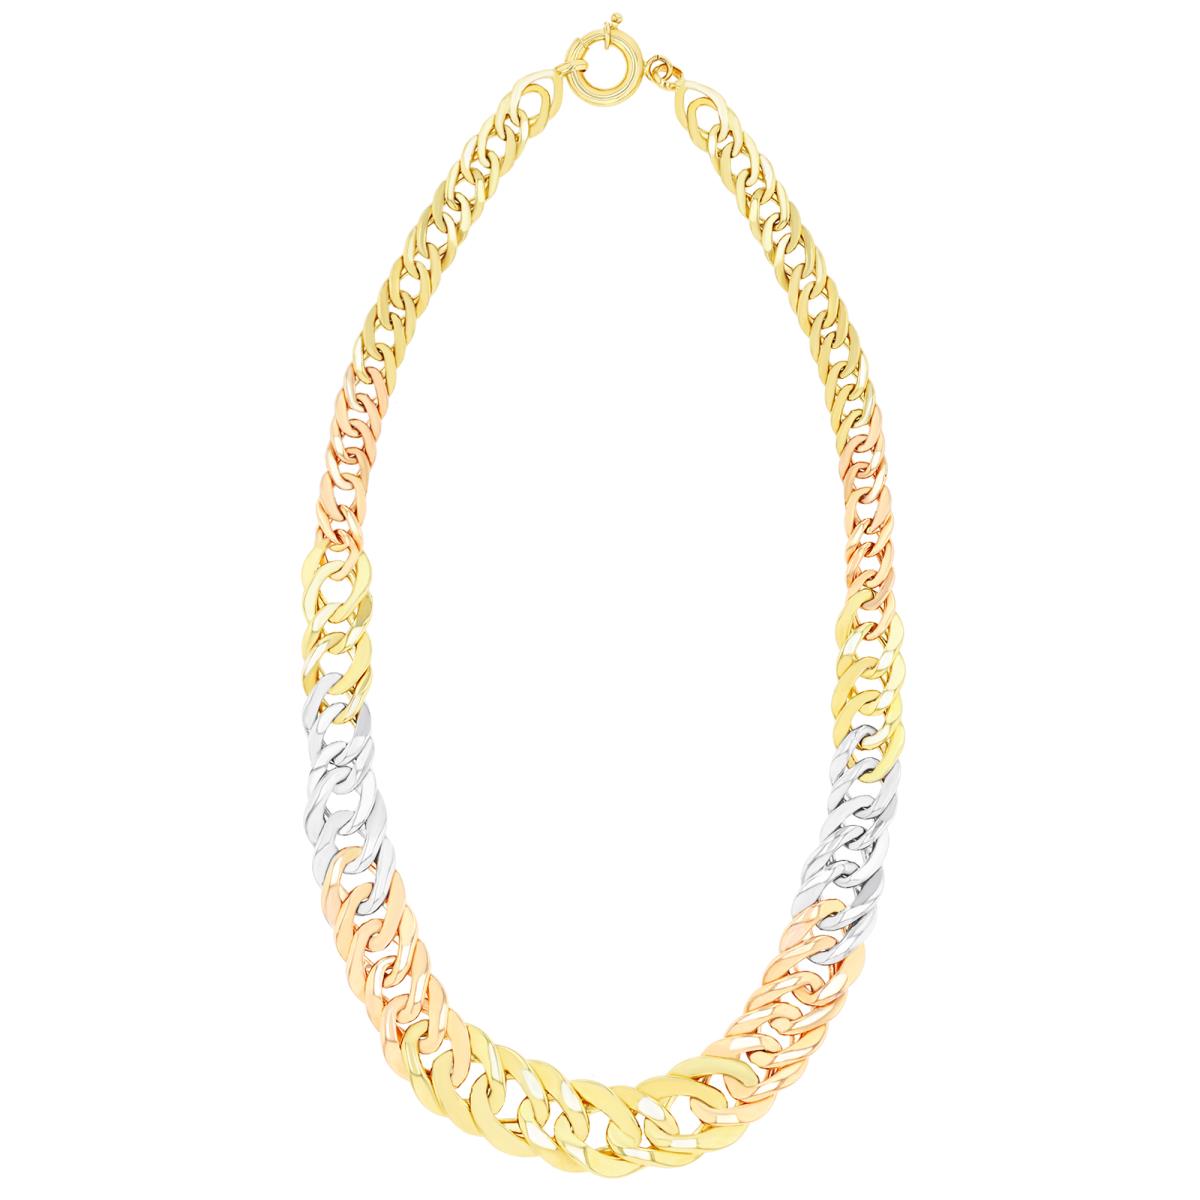 14K Tri-Color Gold 6.5mm-13mm Graduated Hollow Curb 17.5" Chain Necklace